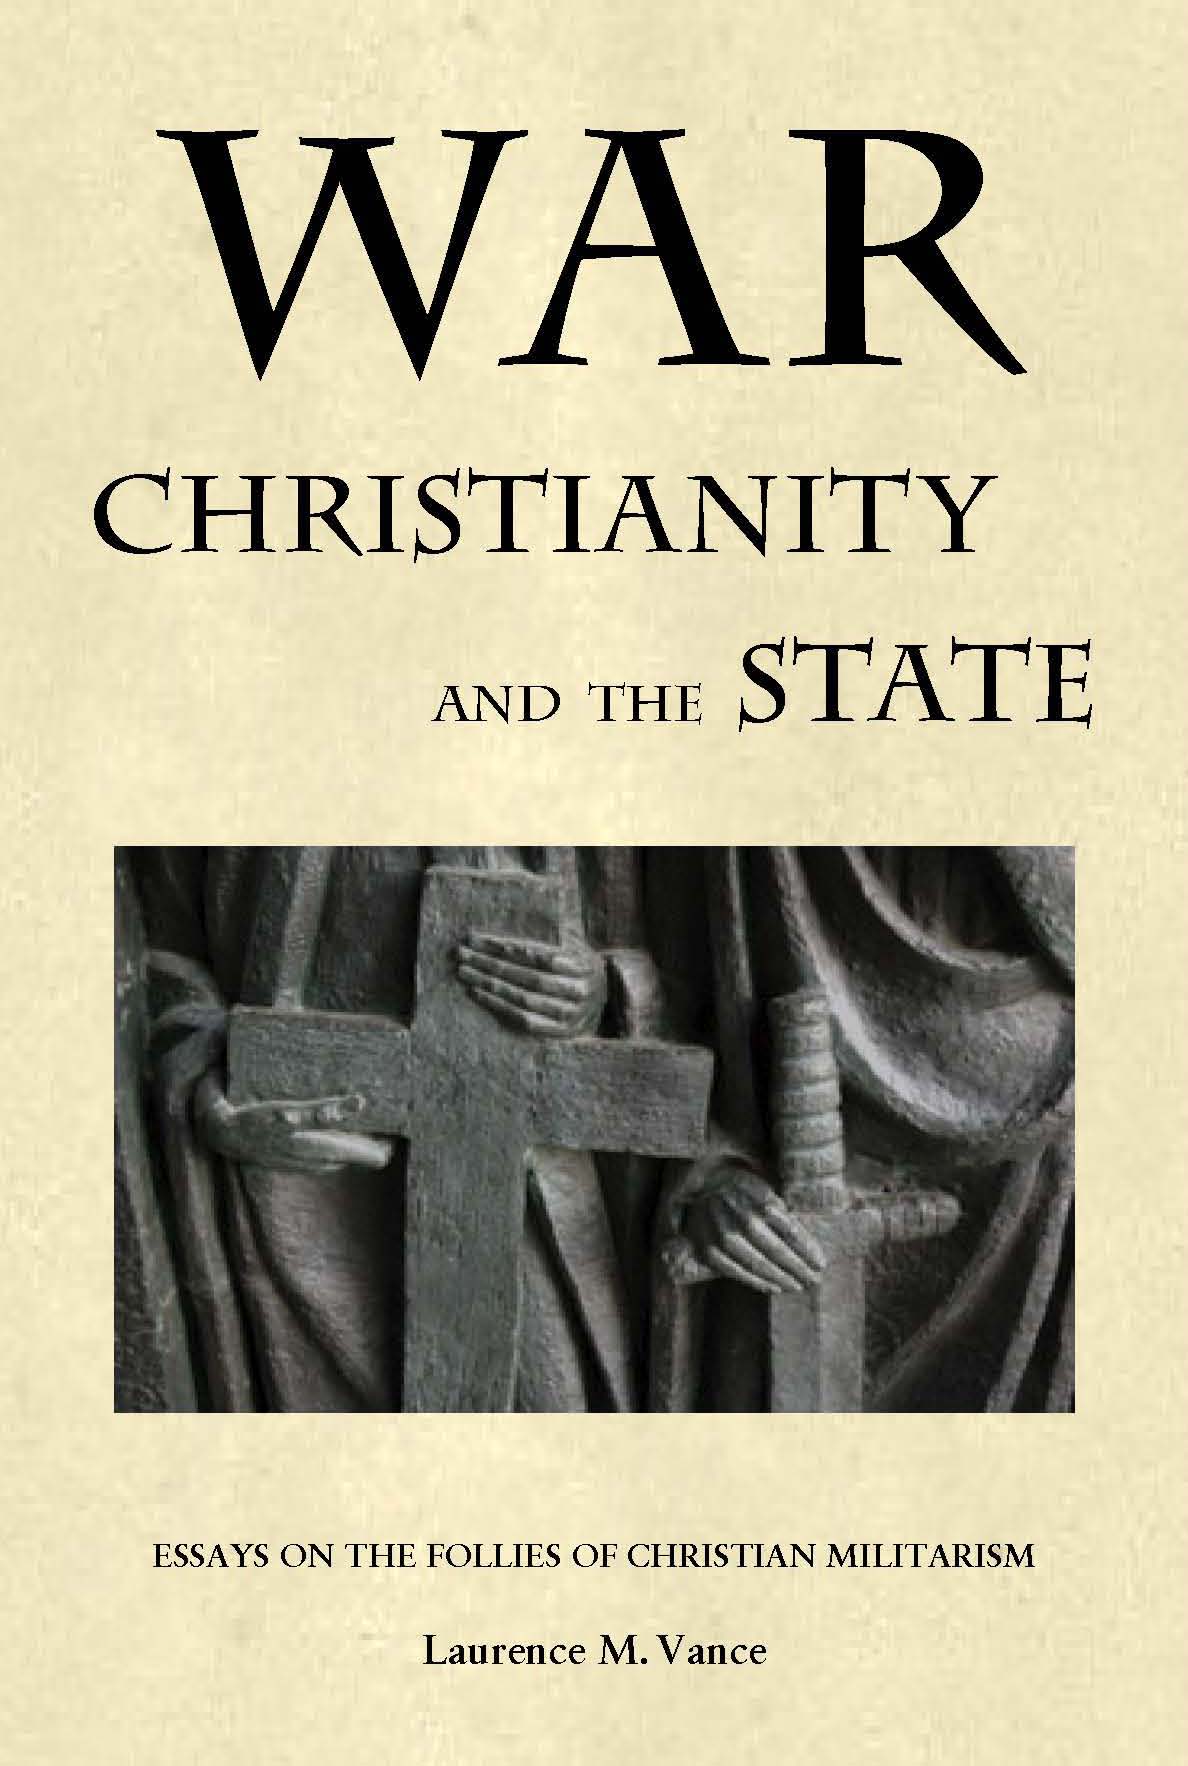 War, Christianity, and the State, 416 pages, paperback, $9.95